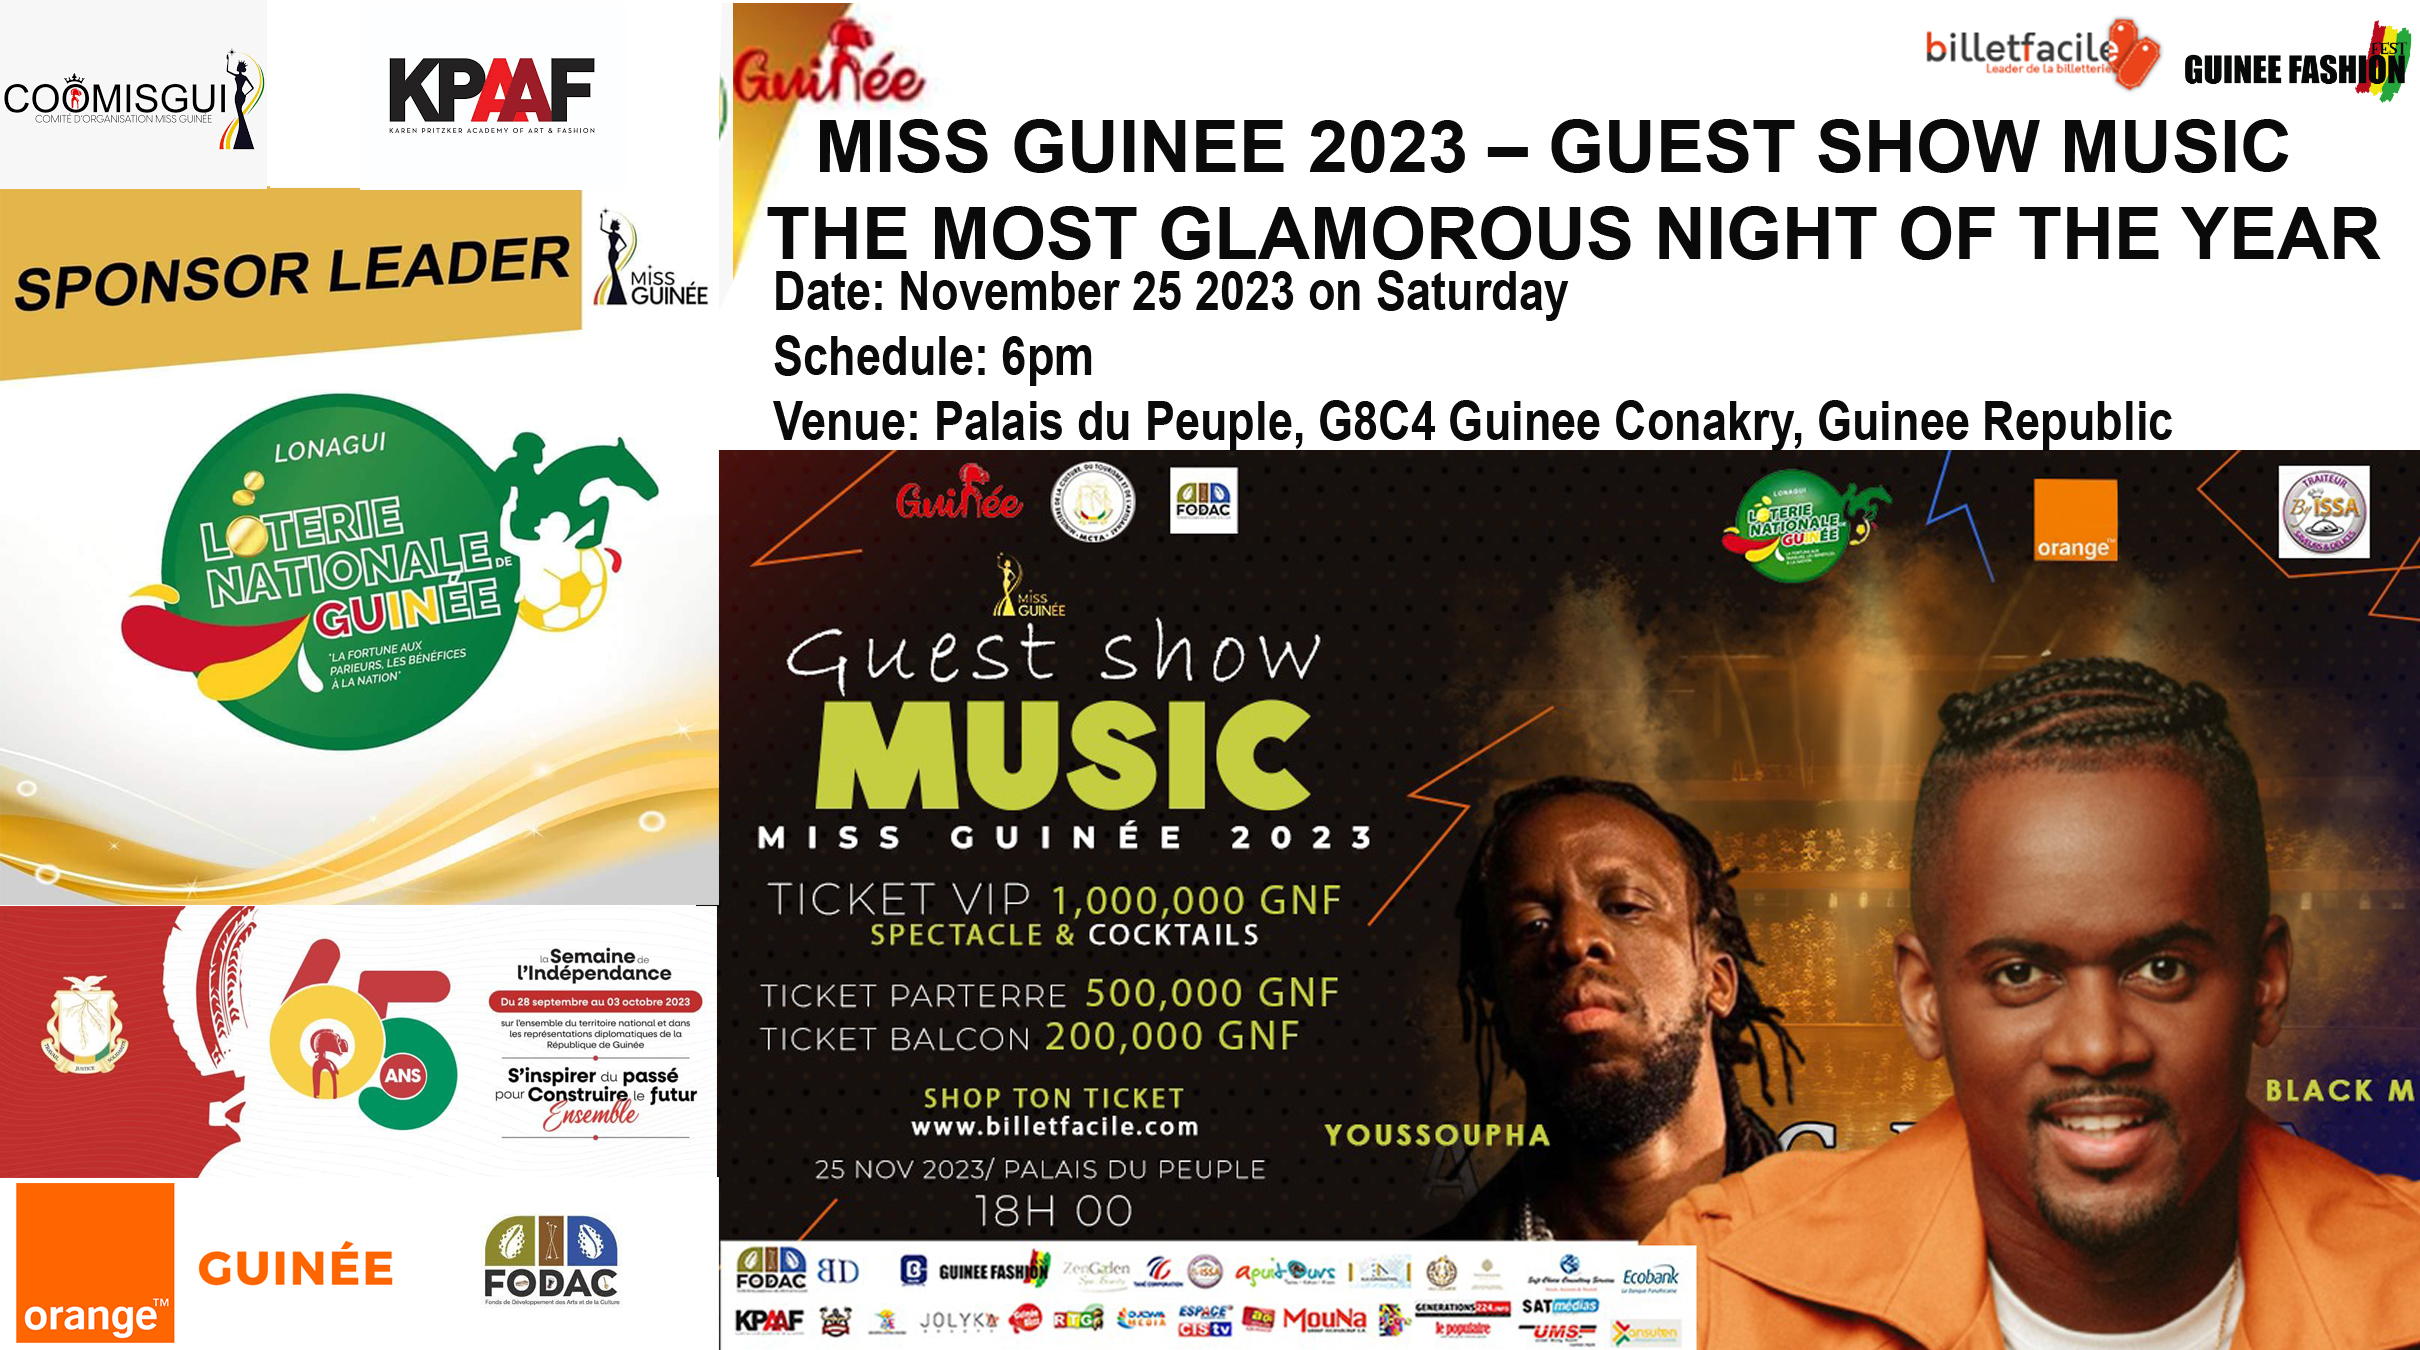 AFRICA-VOGUE-COVER-COOMISGUI-PRESENTS-MISS-GUINEE-2023-GUEST-SHOW-MUSIC -THE-MOST-GLAMOROUS-NIGHT-OF-THE-YEAR-DN-AFRICA-Media-Partner